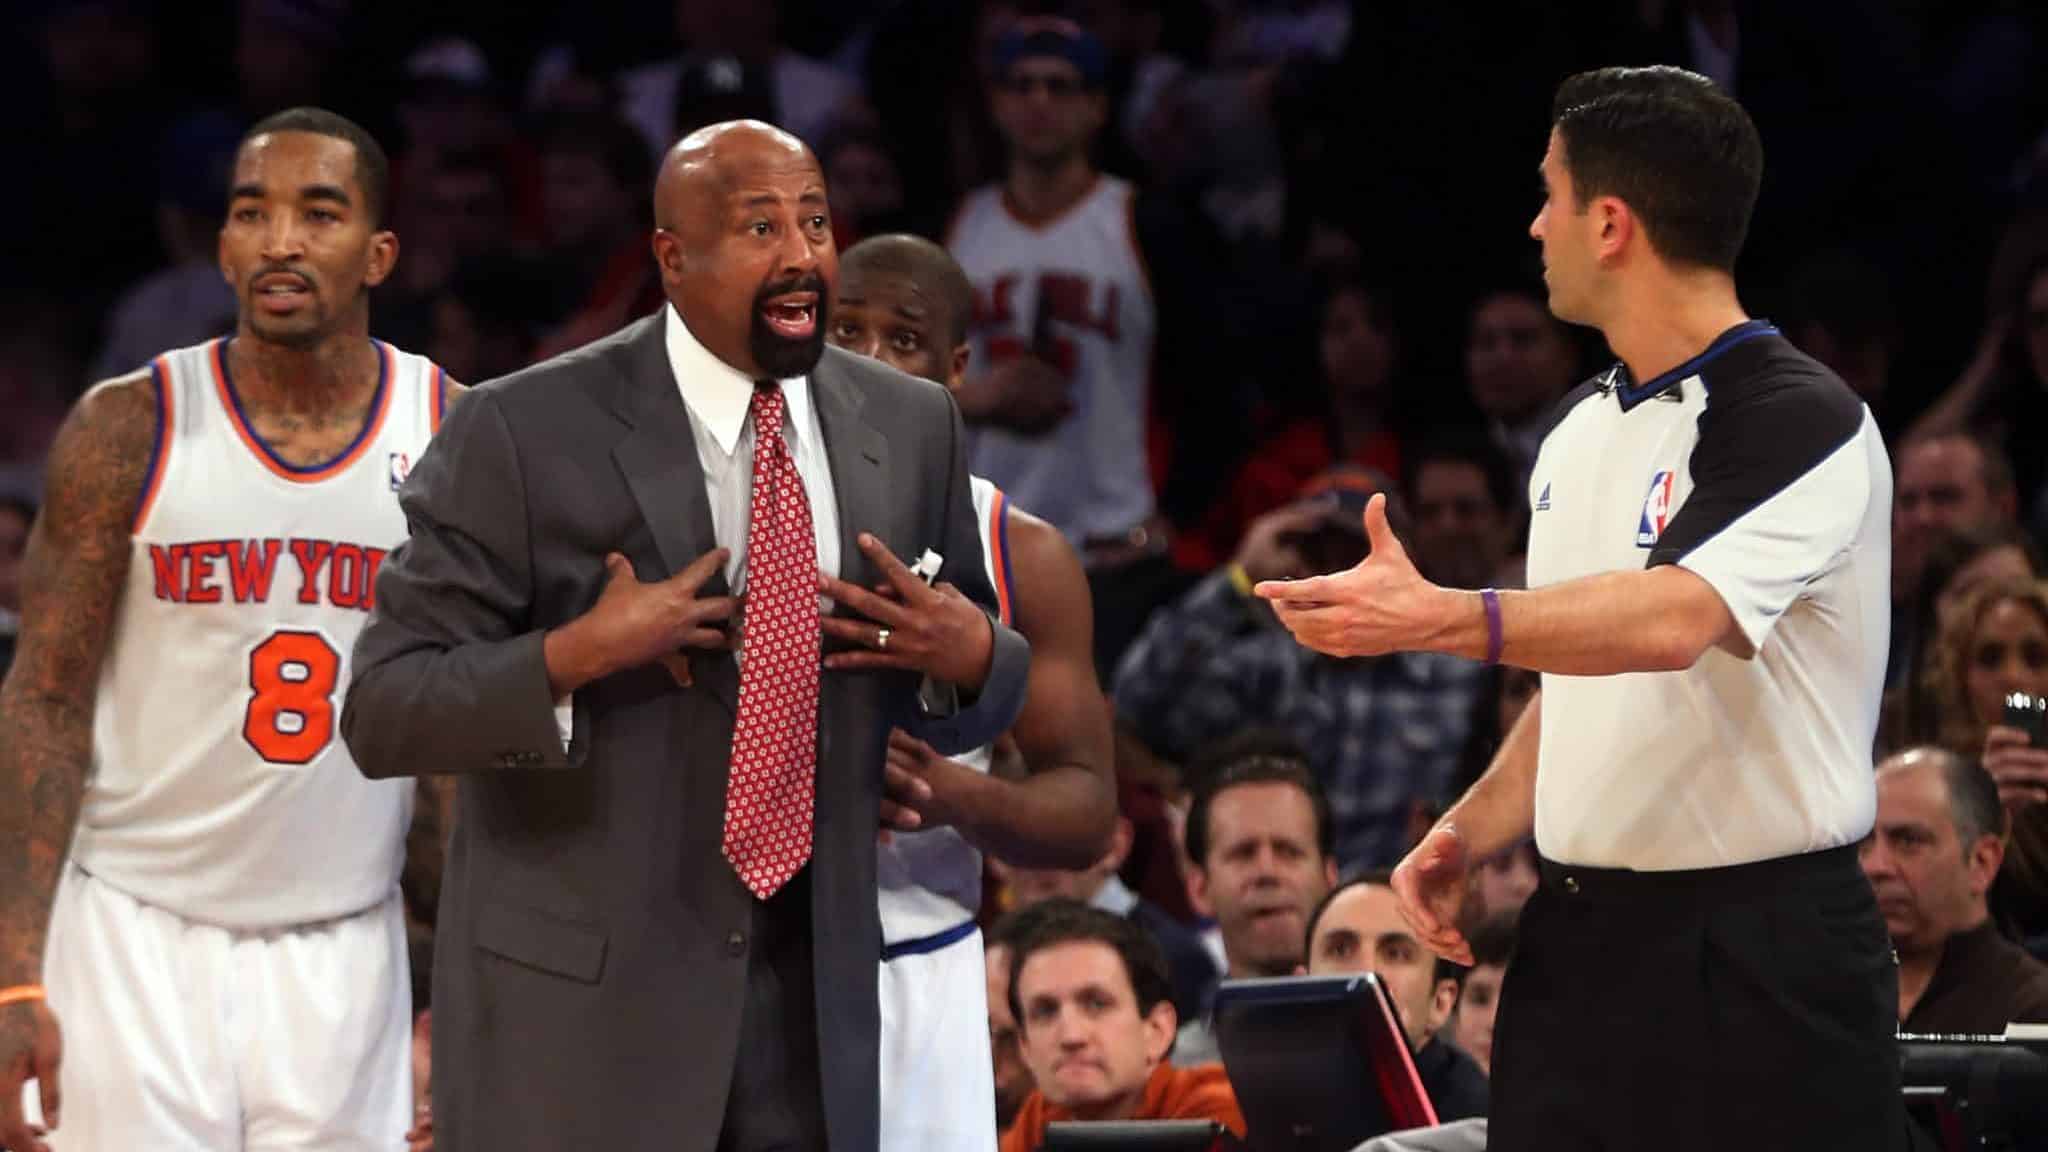 NEW YORK, NY - DECEMBER 21: Head coach Mike Woodson of the New York Knicks argues a call in the game against the Chicago Bulls at Madison Square Garden on December 21, 2012 in New York City. NOTE TO USER: User expressly acknowledges and agrees that, by downloading and/or using this photograph, user is consenting to the terms and conditions of the Getty Images License Agreement.